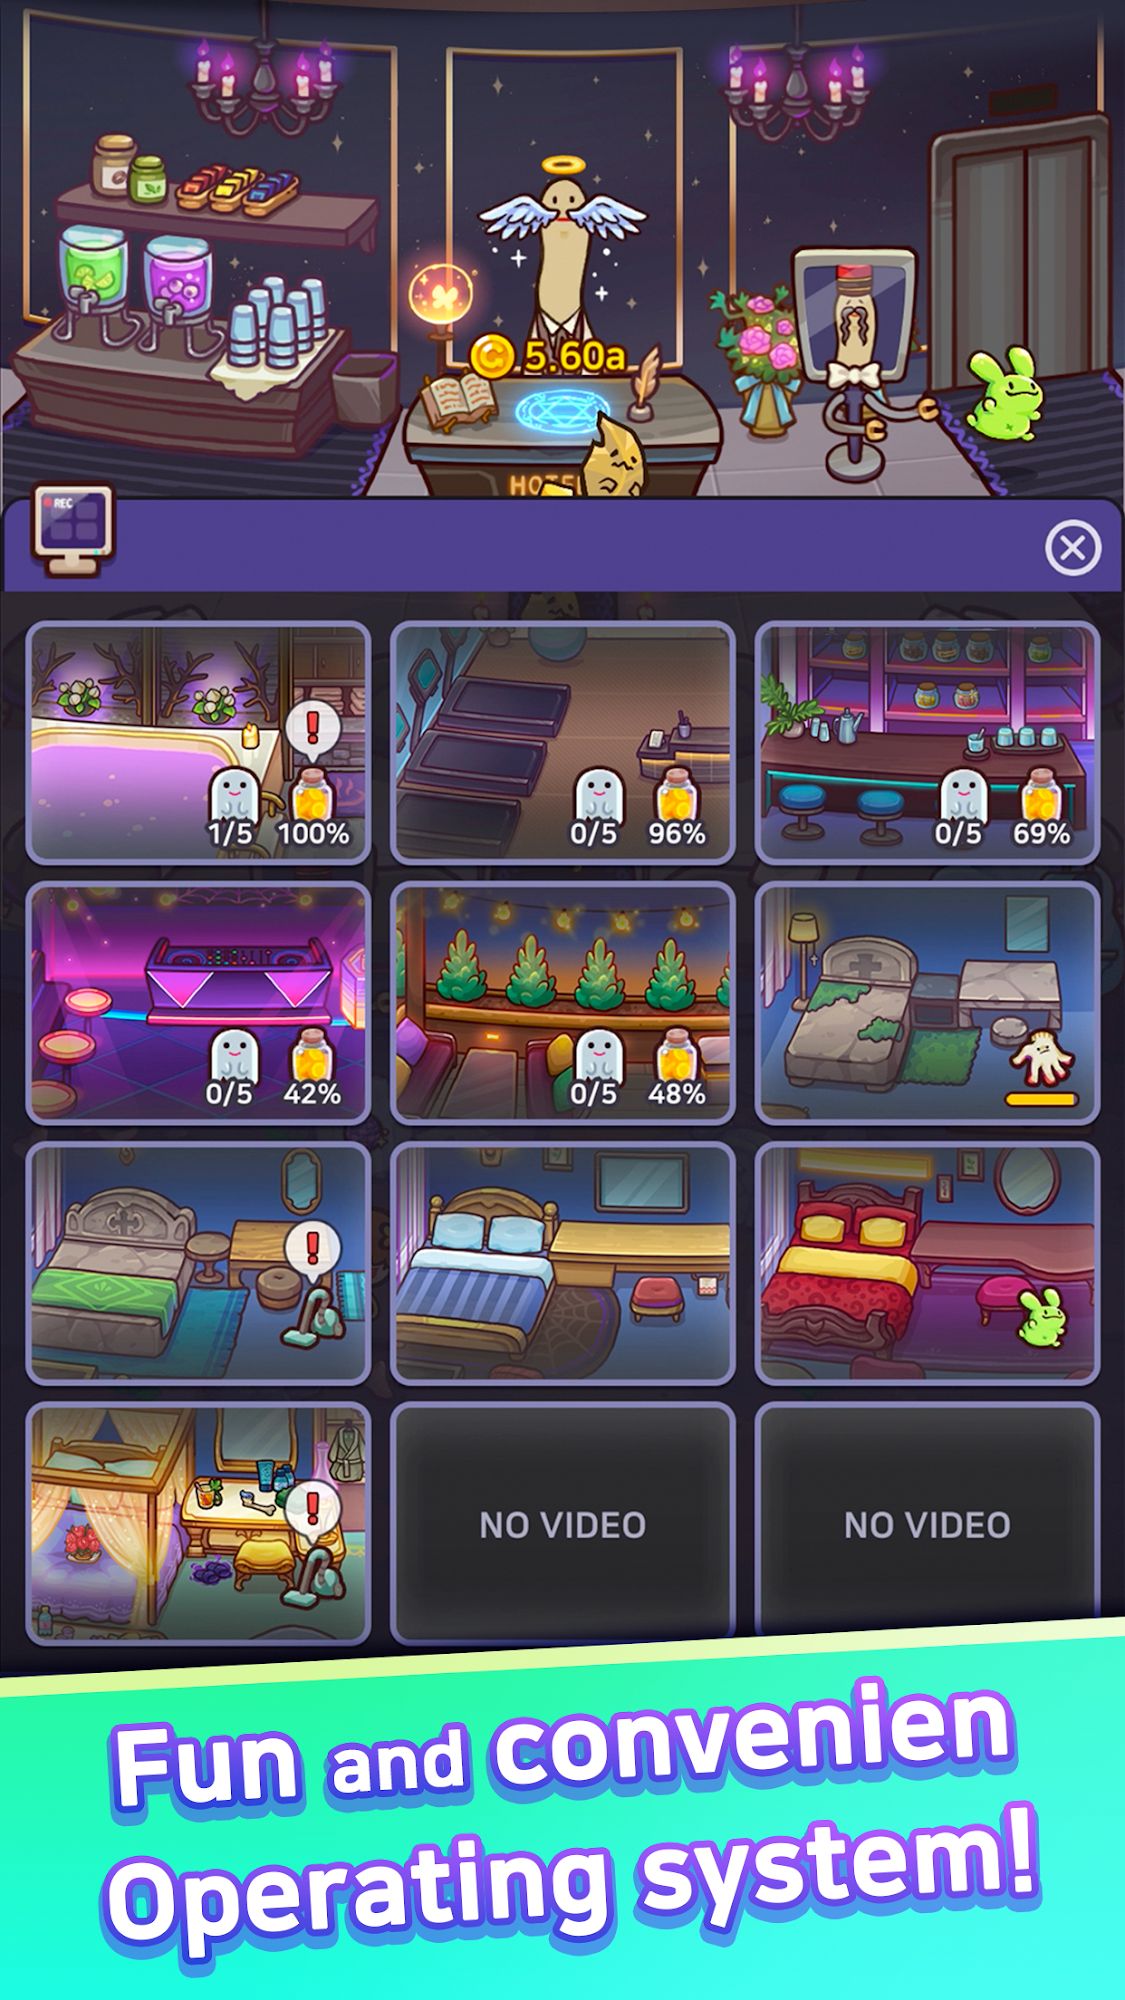 Gameplay of the Idle Ghost Hotel for Android phone or tablet.